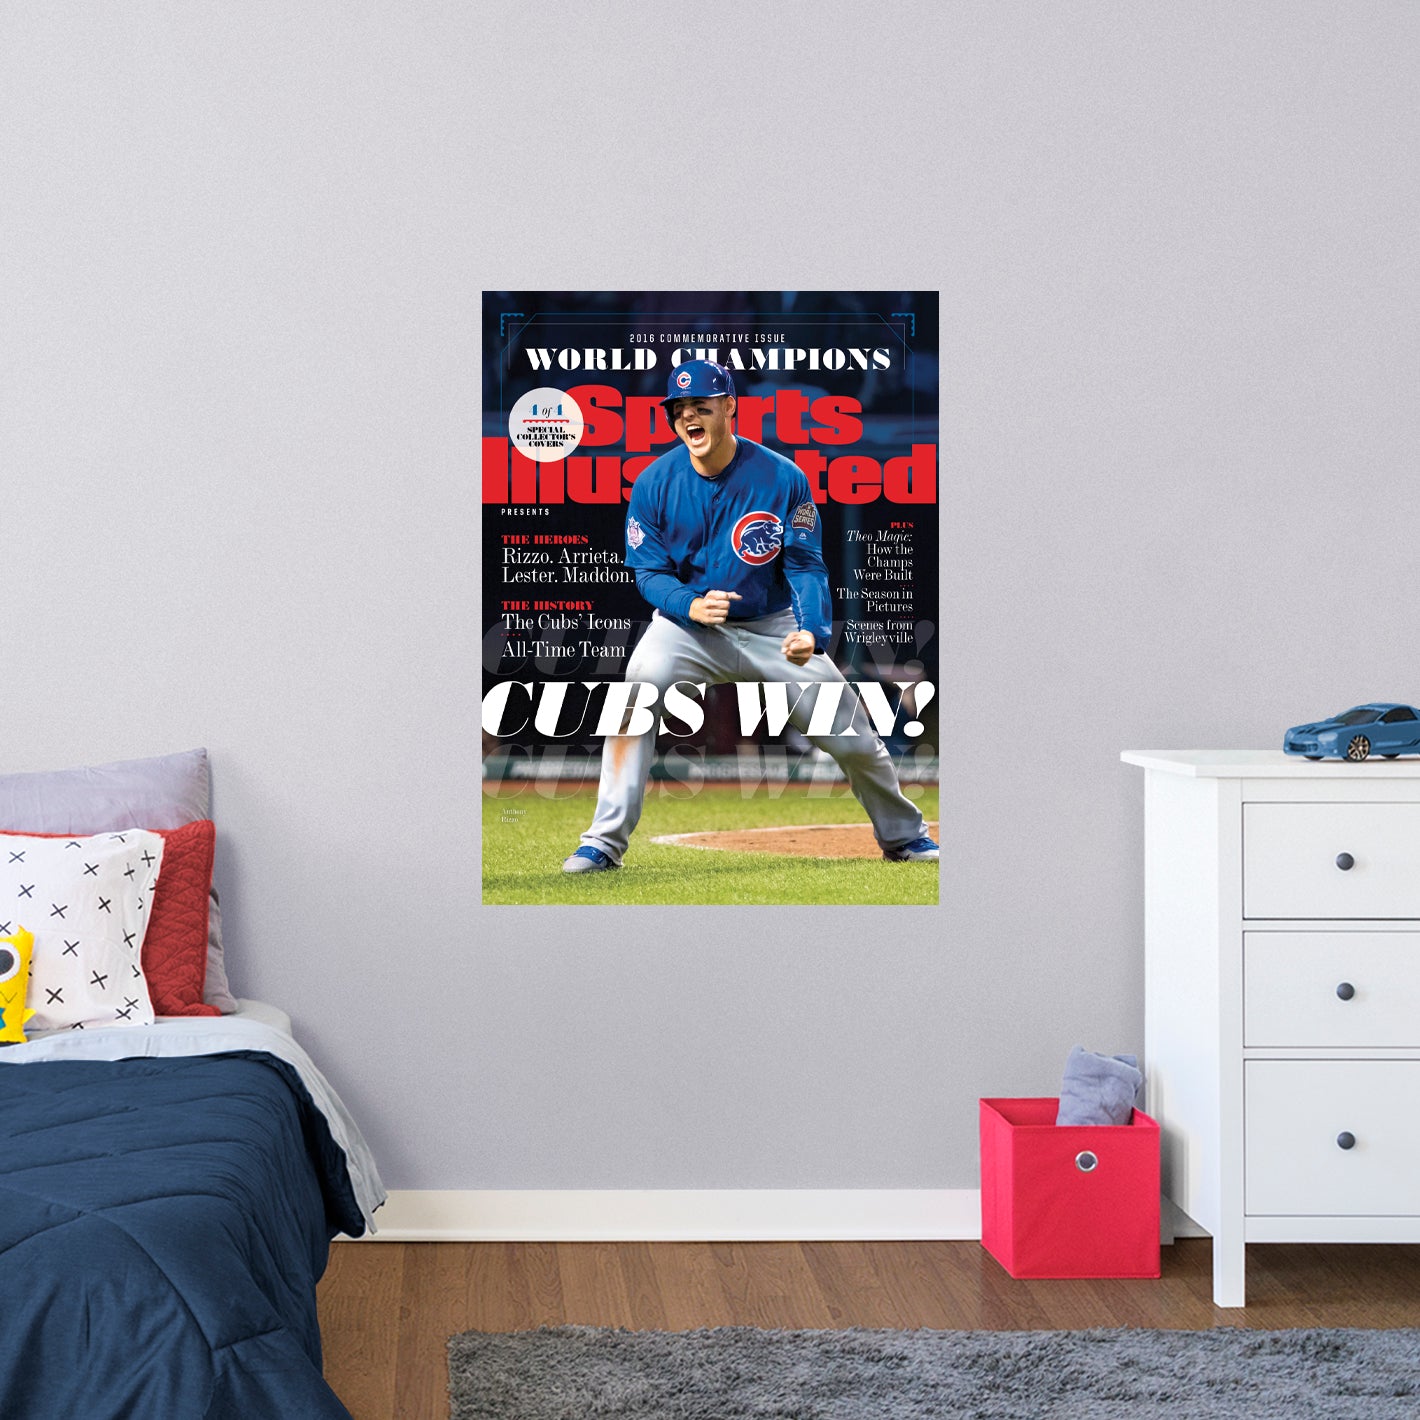 Chicago Cubs: Anthony Rizzo November 2016 Champions Commemorative Sports Illustrated Cover - Officially Licensed MLB Removable Adhesive Decal